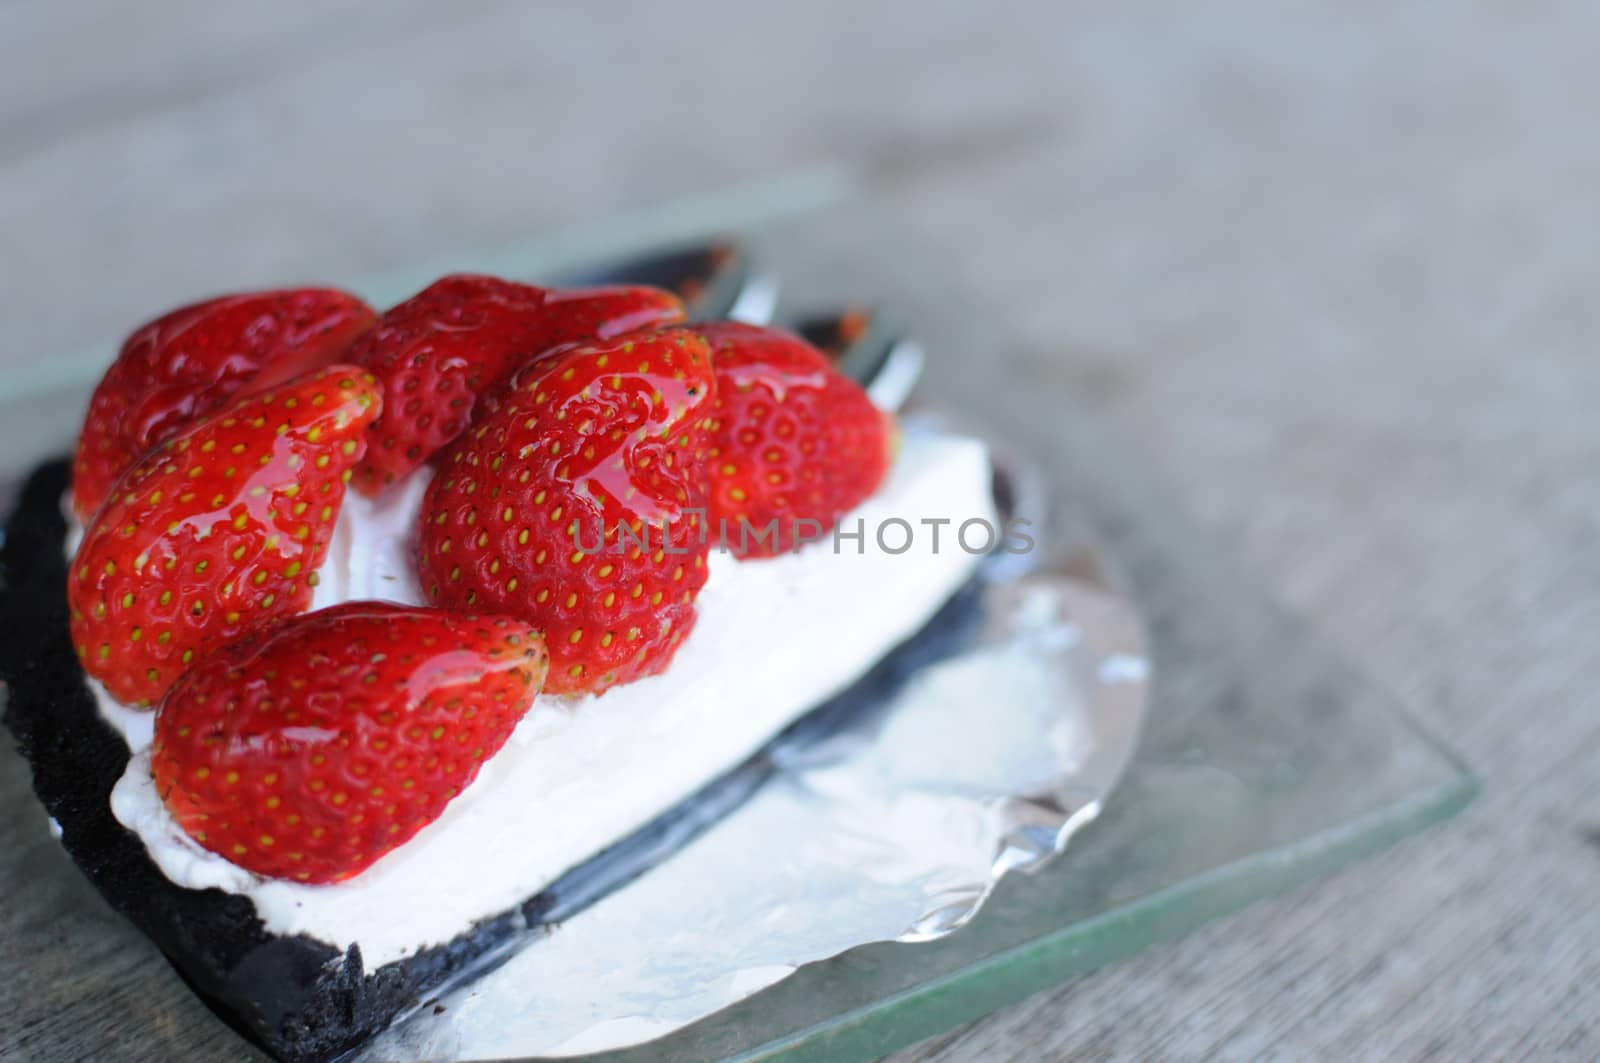 Strawberry cake on Glass Plate